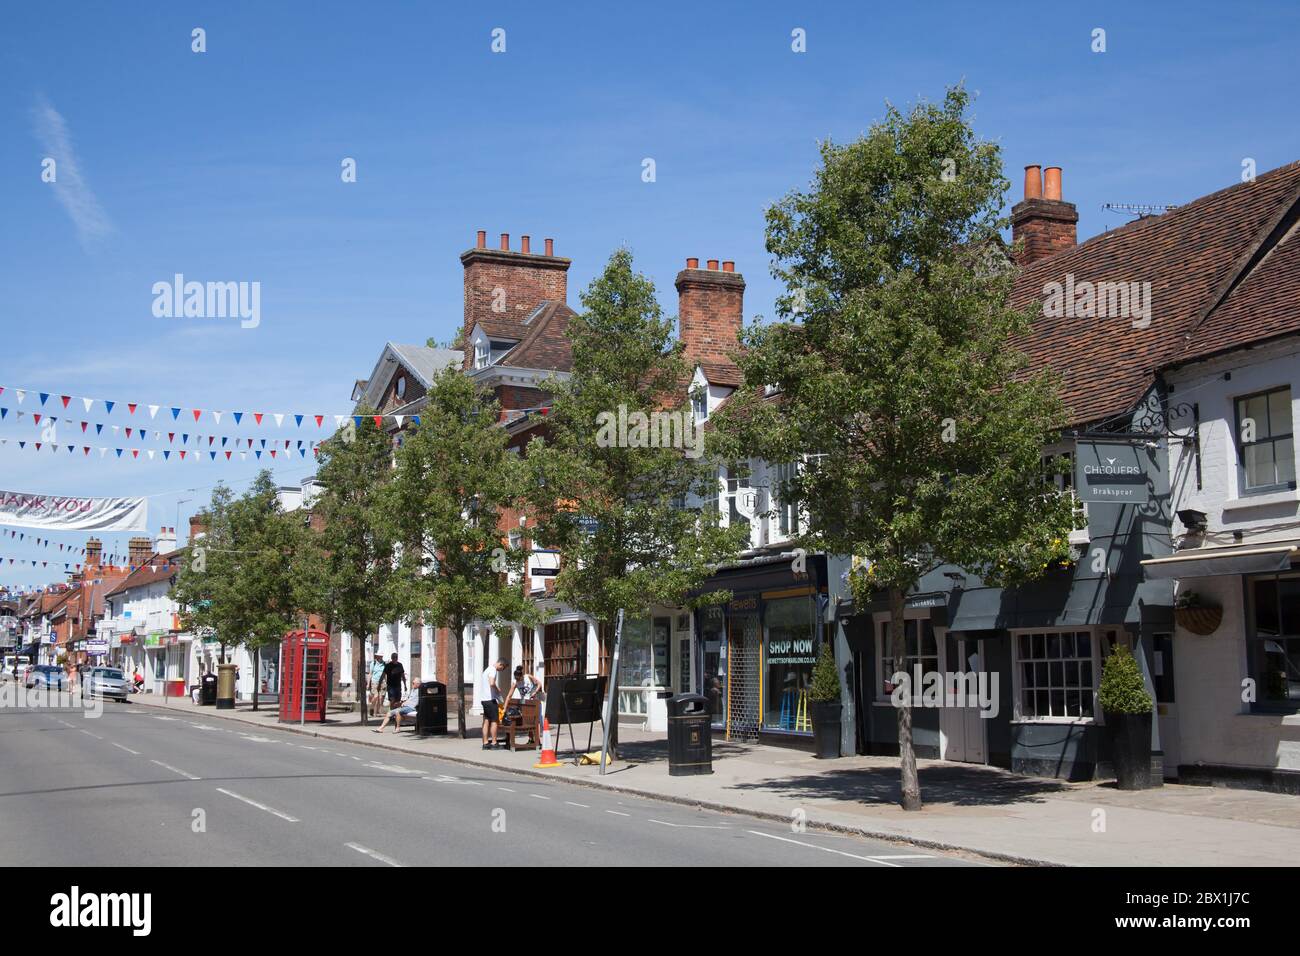 The High Street in Marlow, Buckinghamshire in the United Kingdom Stock Photo